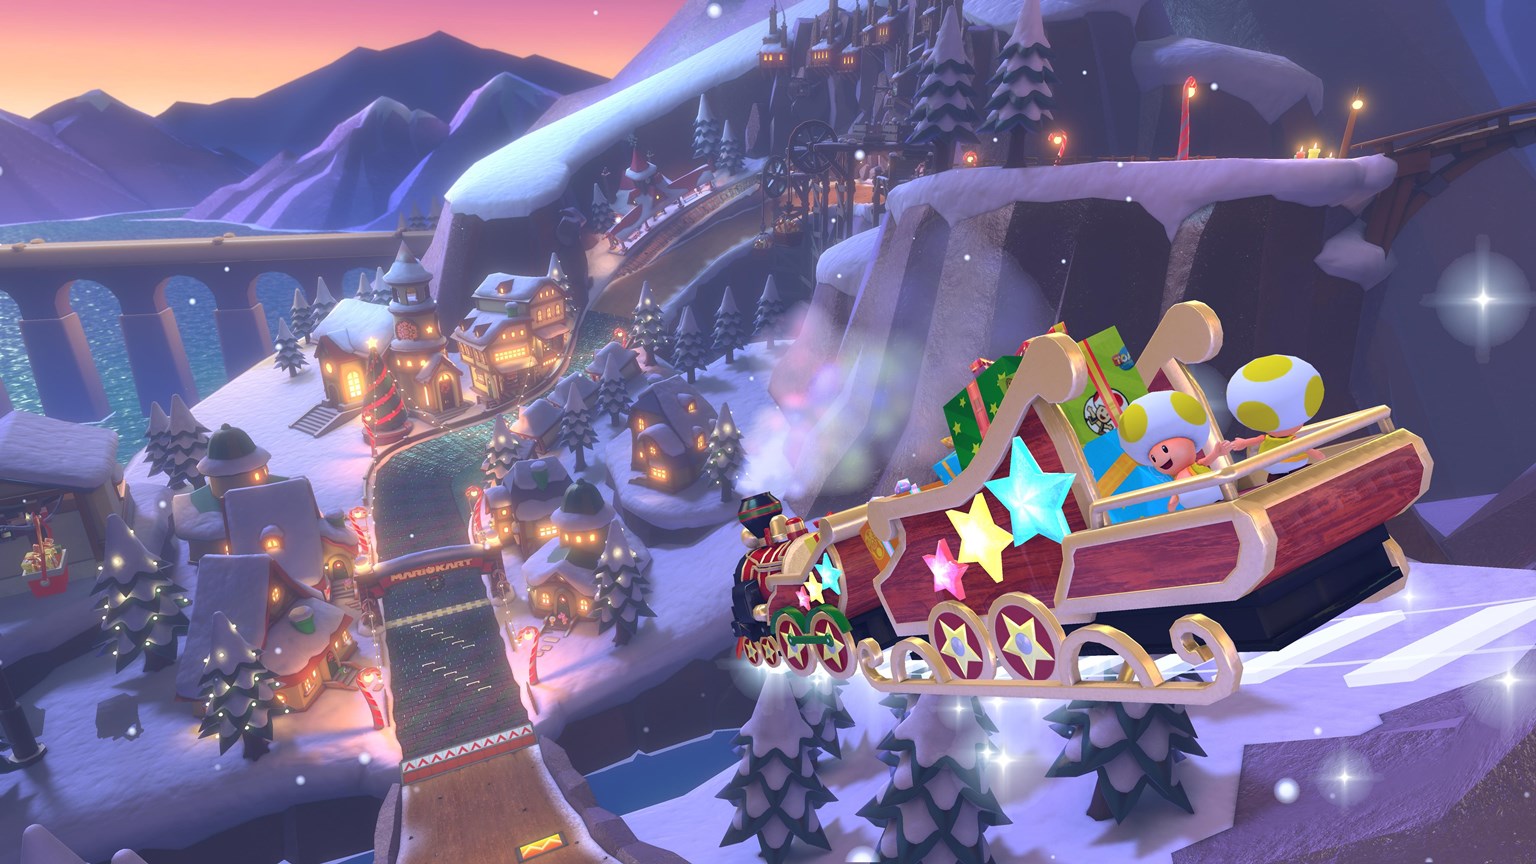 Mario Kart 8 Deluxe DLC: Booster Course Pass Price, Wave 3 Release